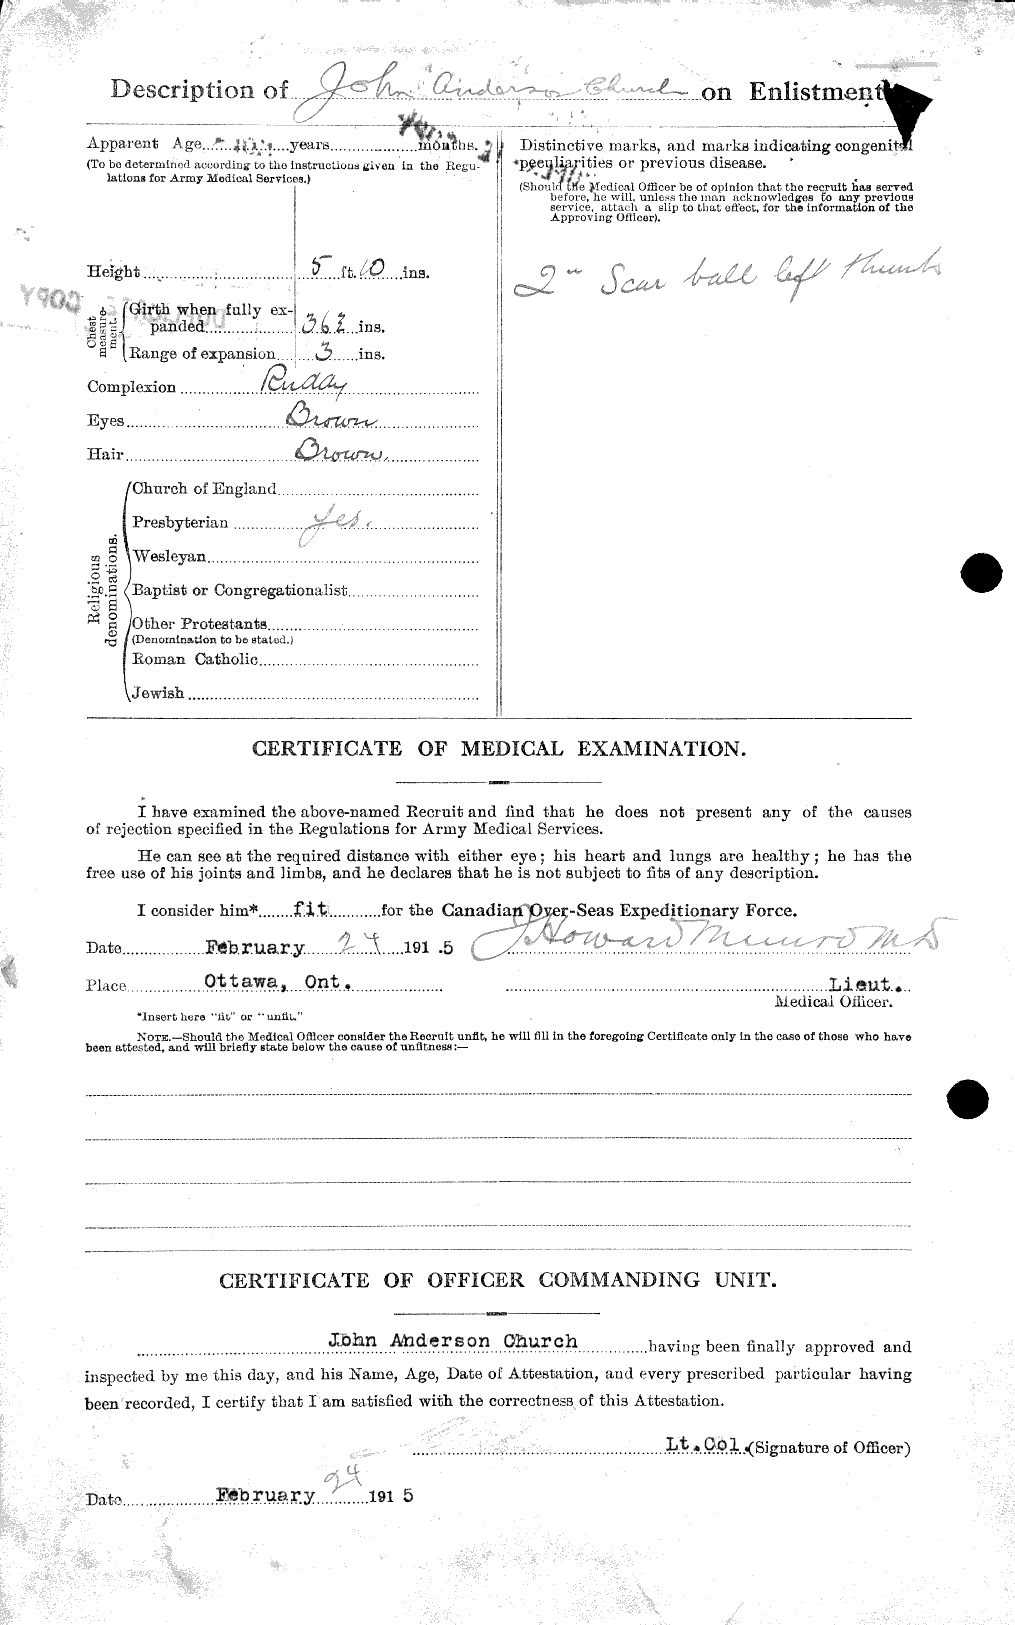 Personnel Records of the First World War - CEF 022356b